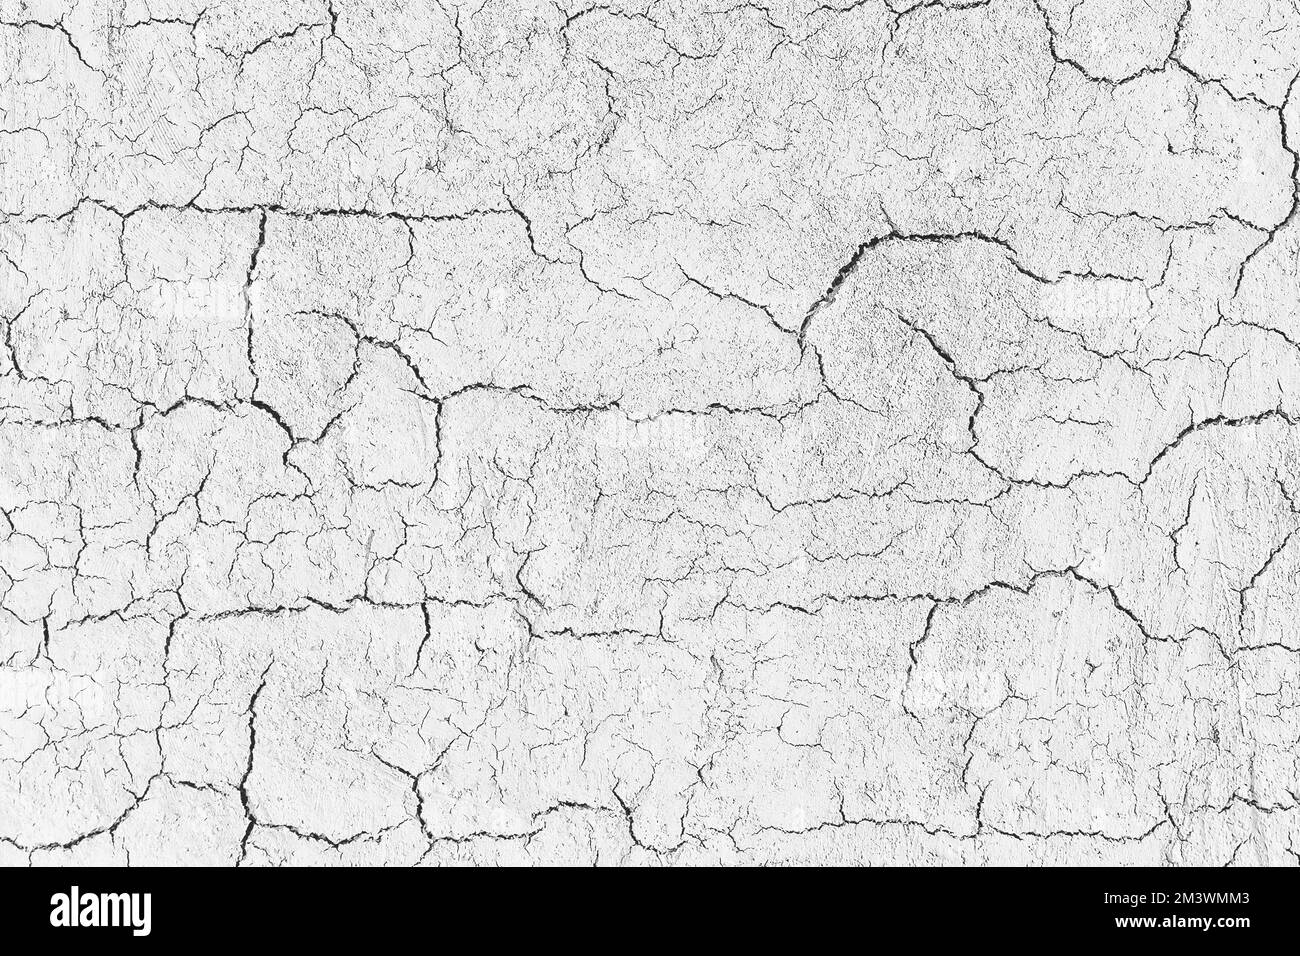 Old grunge cracked wall textures backgrounds. black and white perfect background with space Stock Photo